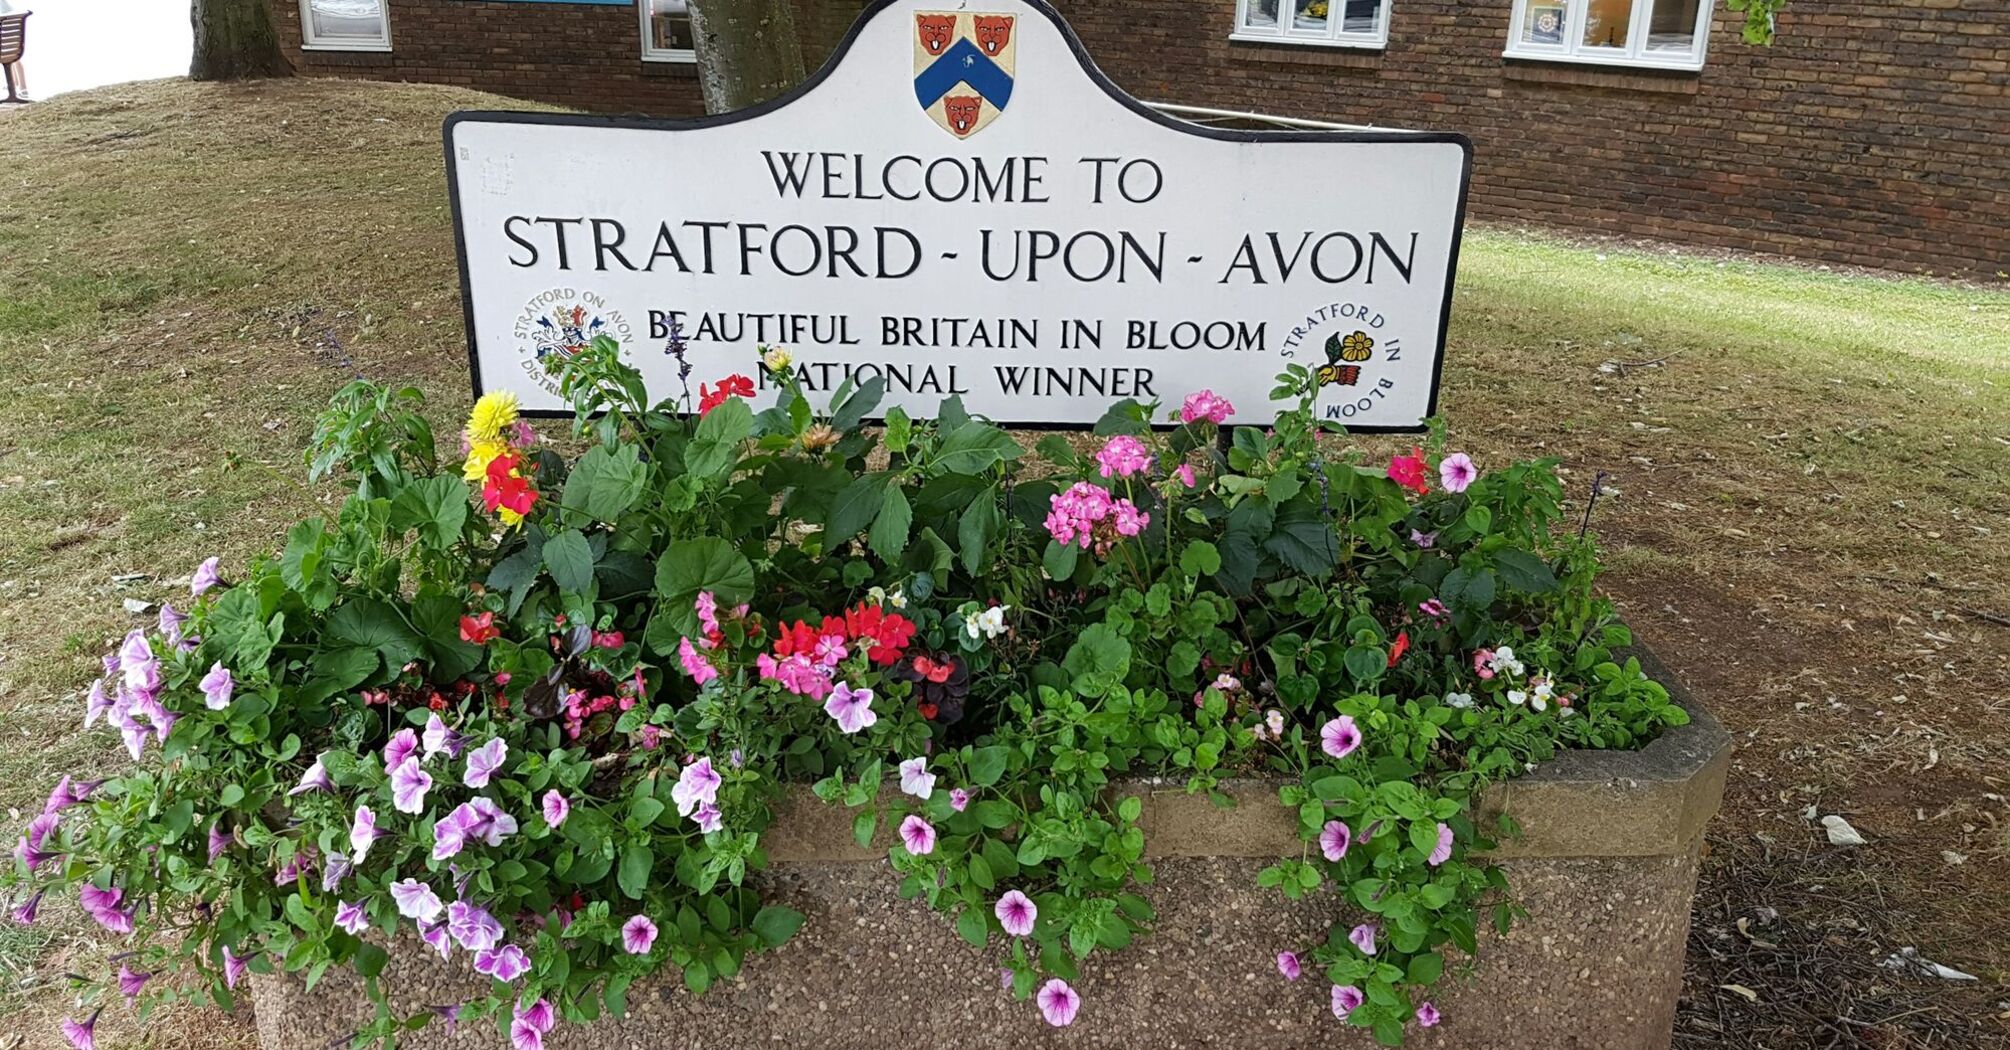 A "Welcome to Stratford-upon-Avon" sign with colorful flowers in front of the Visitor Information Centre